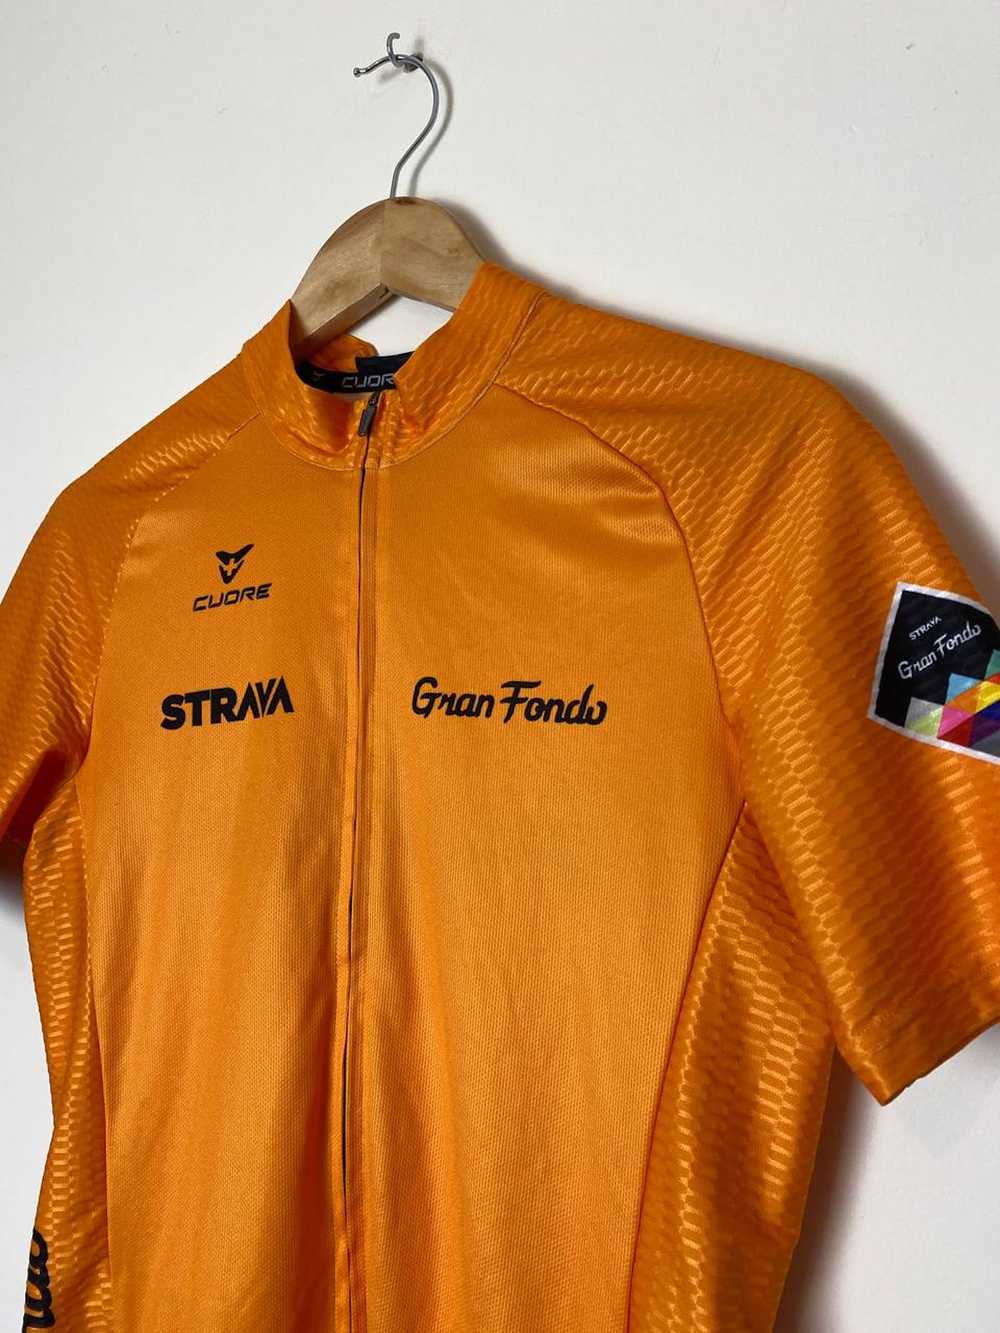 Cycle × Jersey × Sportswear Cuore Strava Limited … - image 3